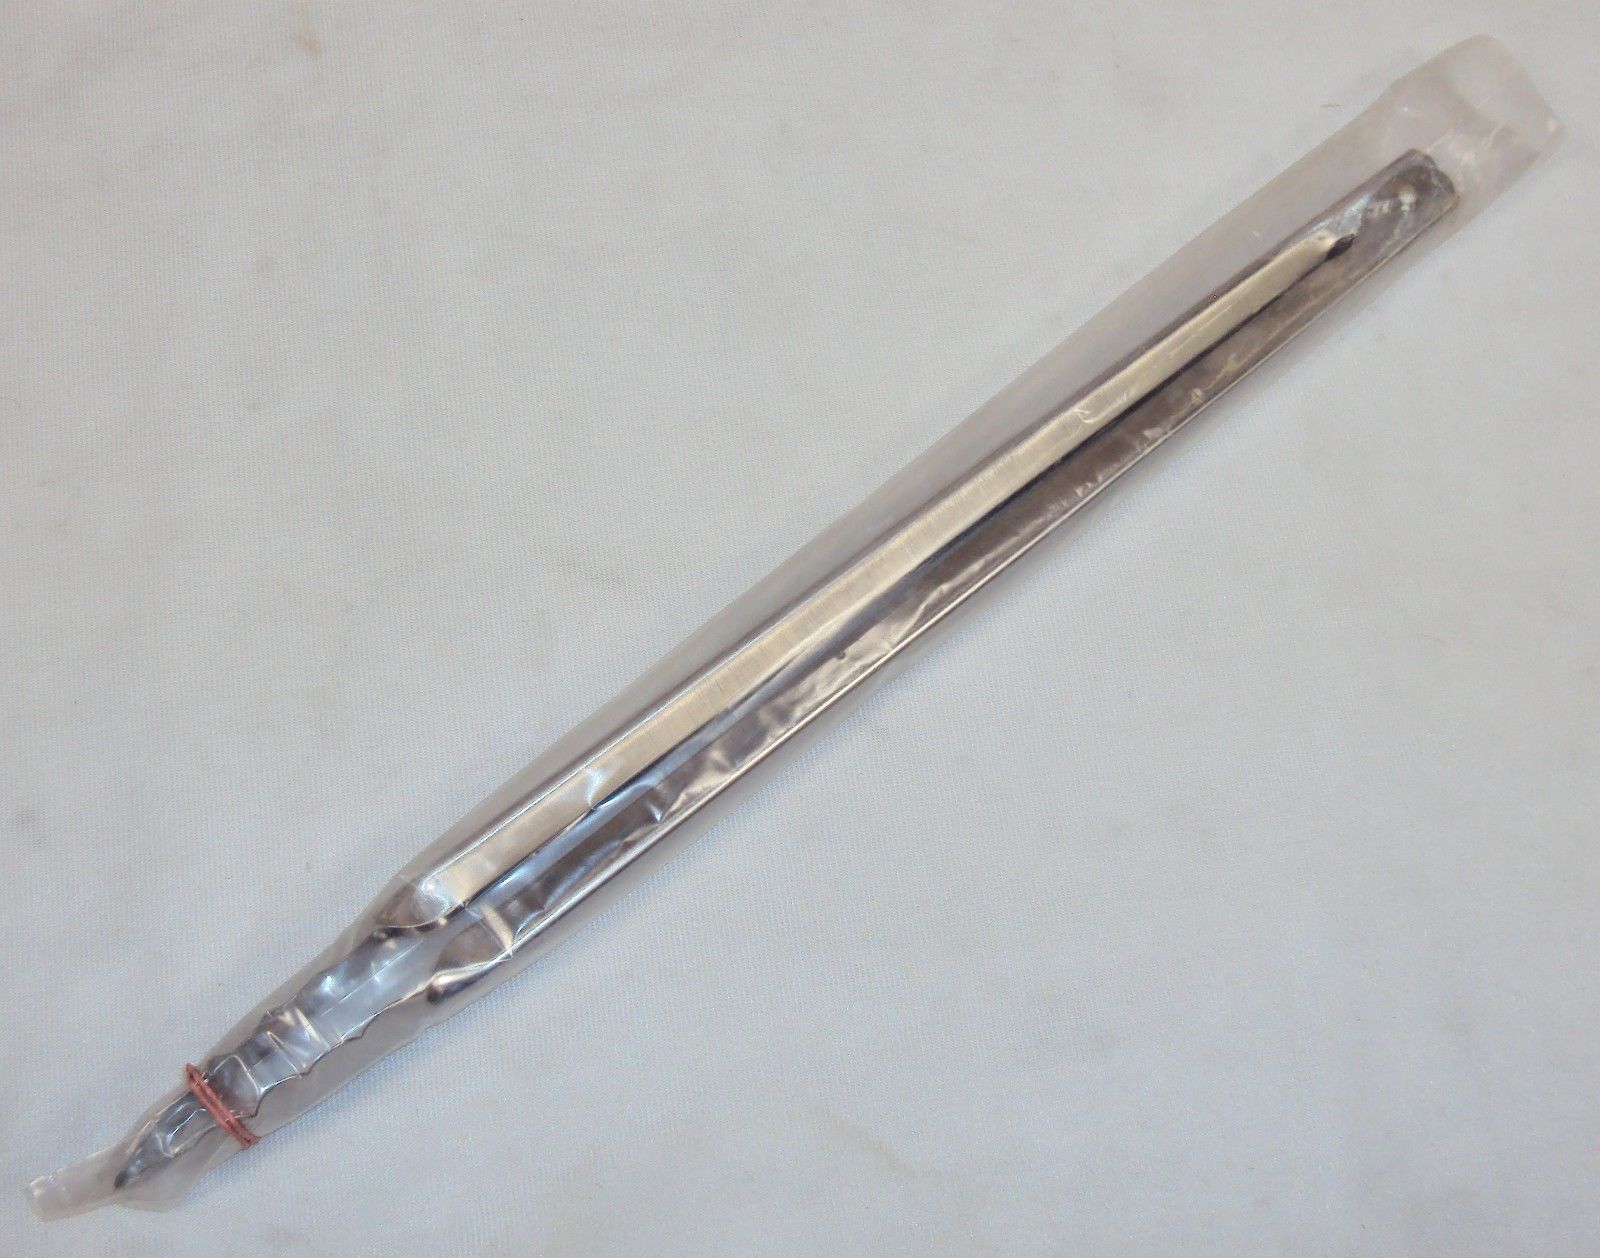 16" Stainless Steel Kitchen Tongs ~ For Meats, Deep Frying, Salads, Food Serving - $9.75